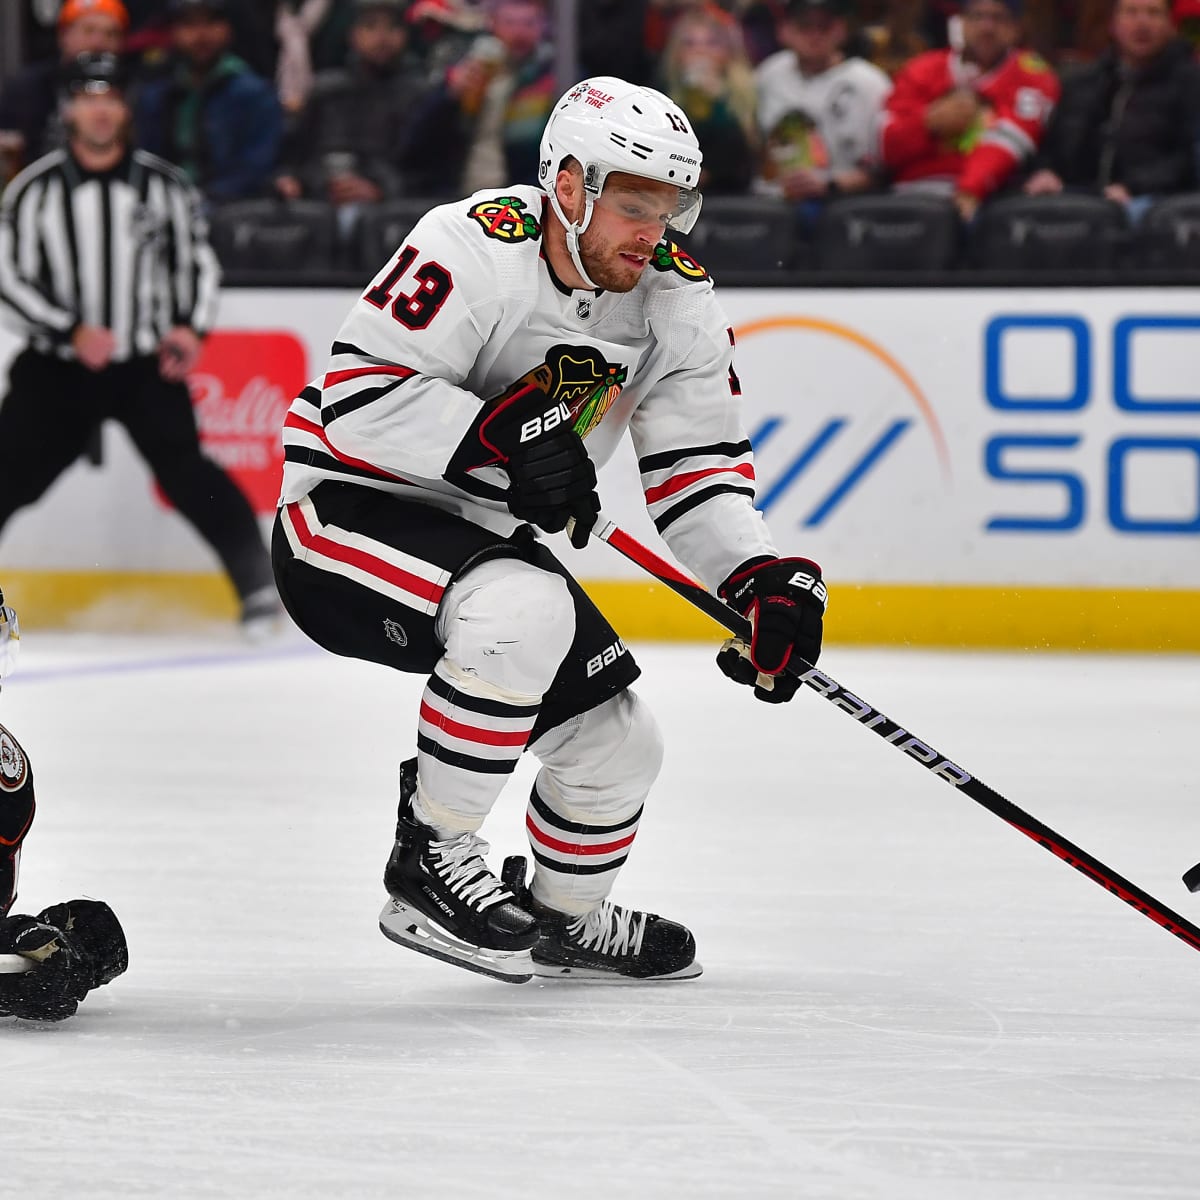 Blackhawks, Stars reportedly close to deal on Max Domi – NBC